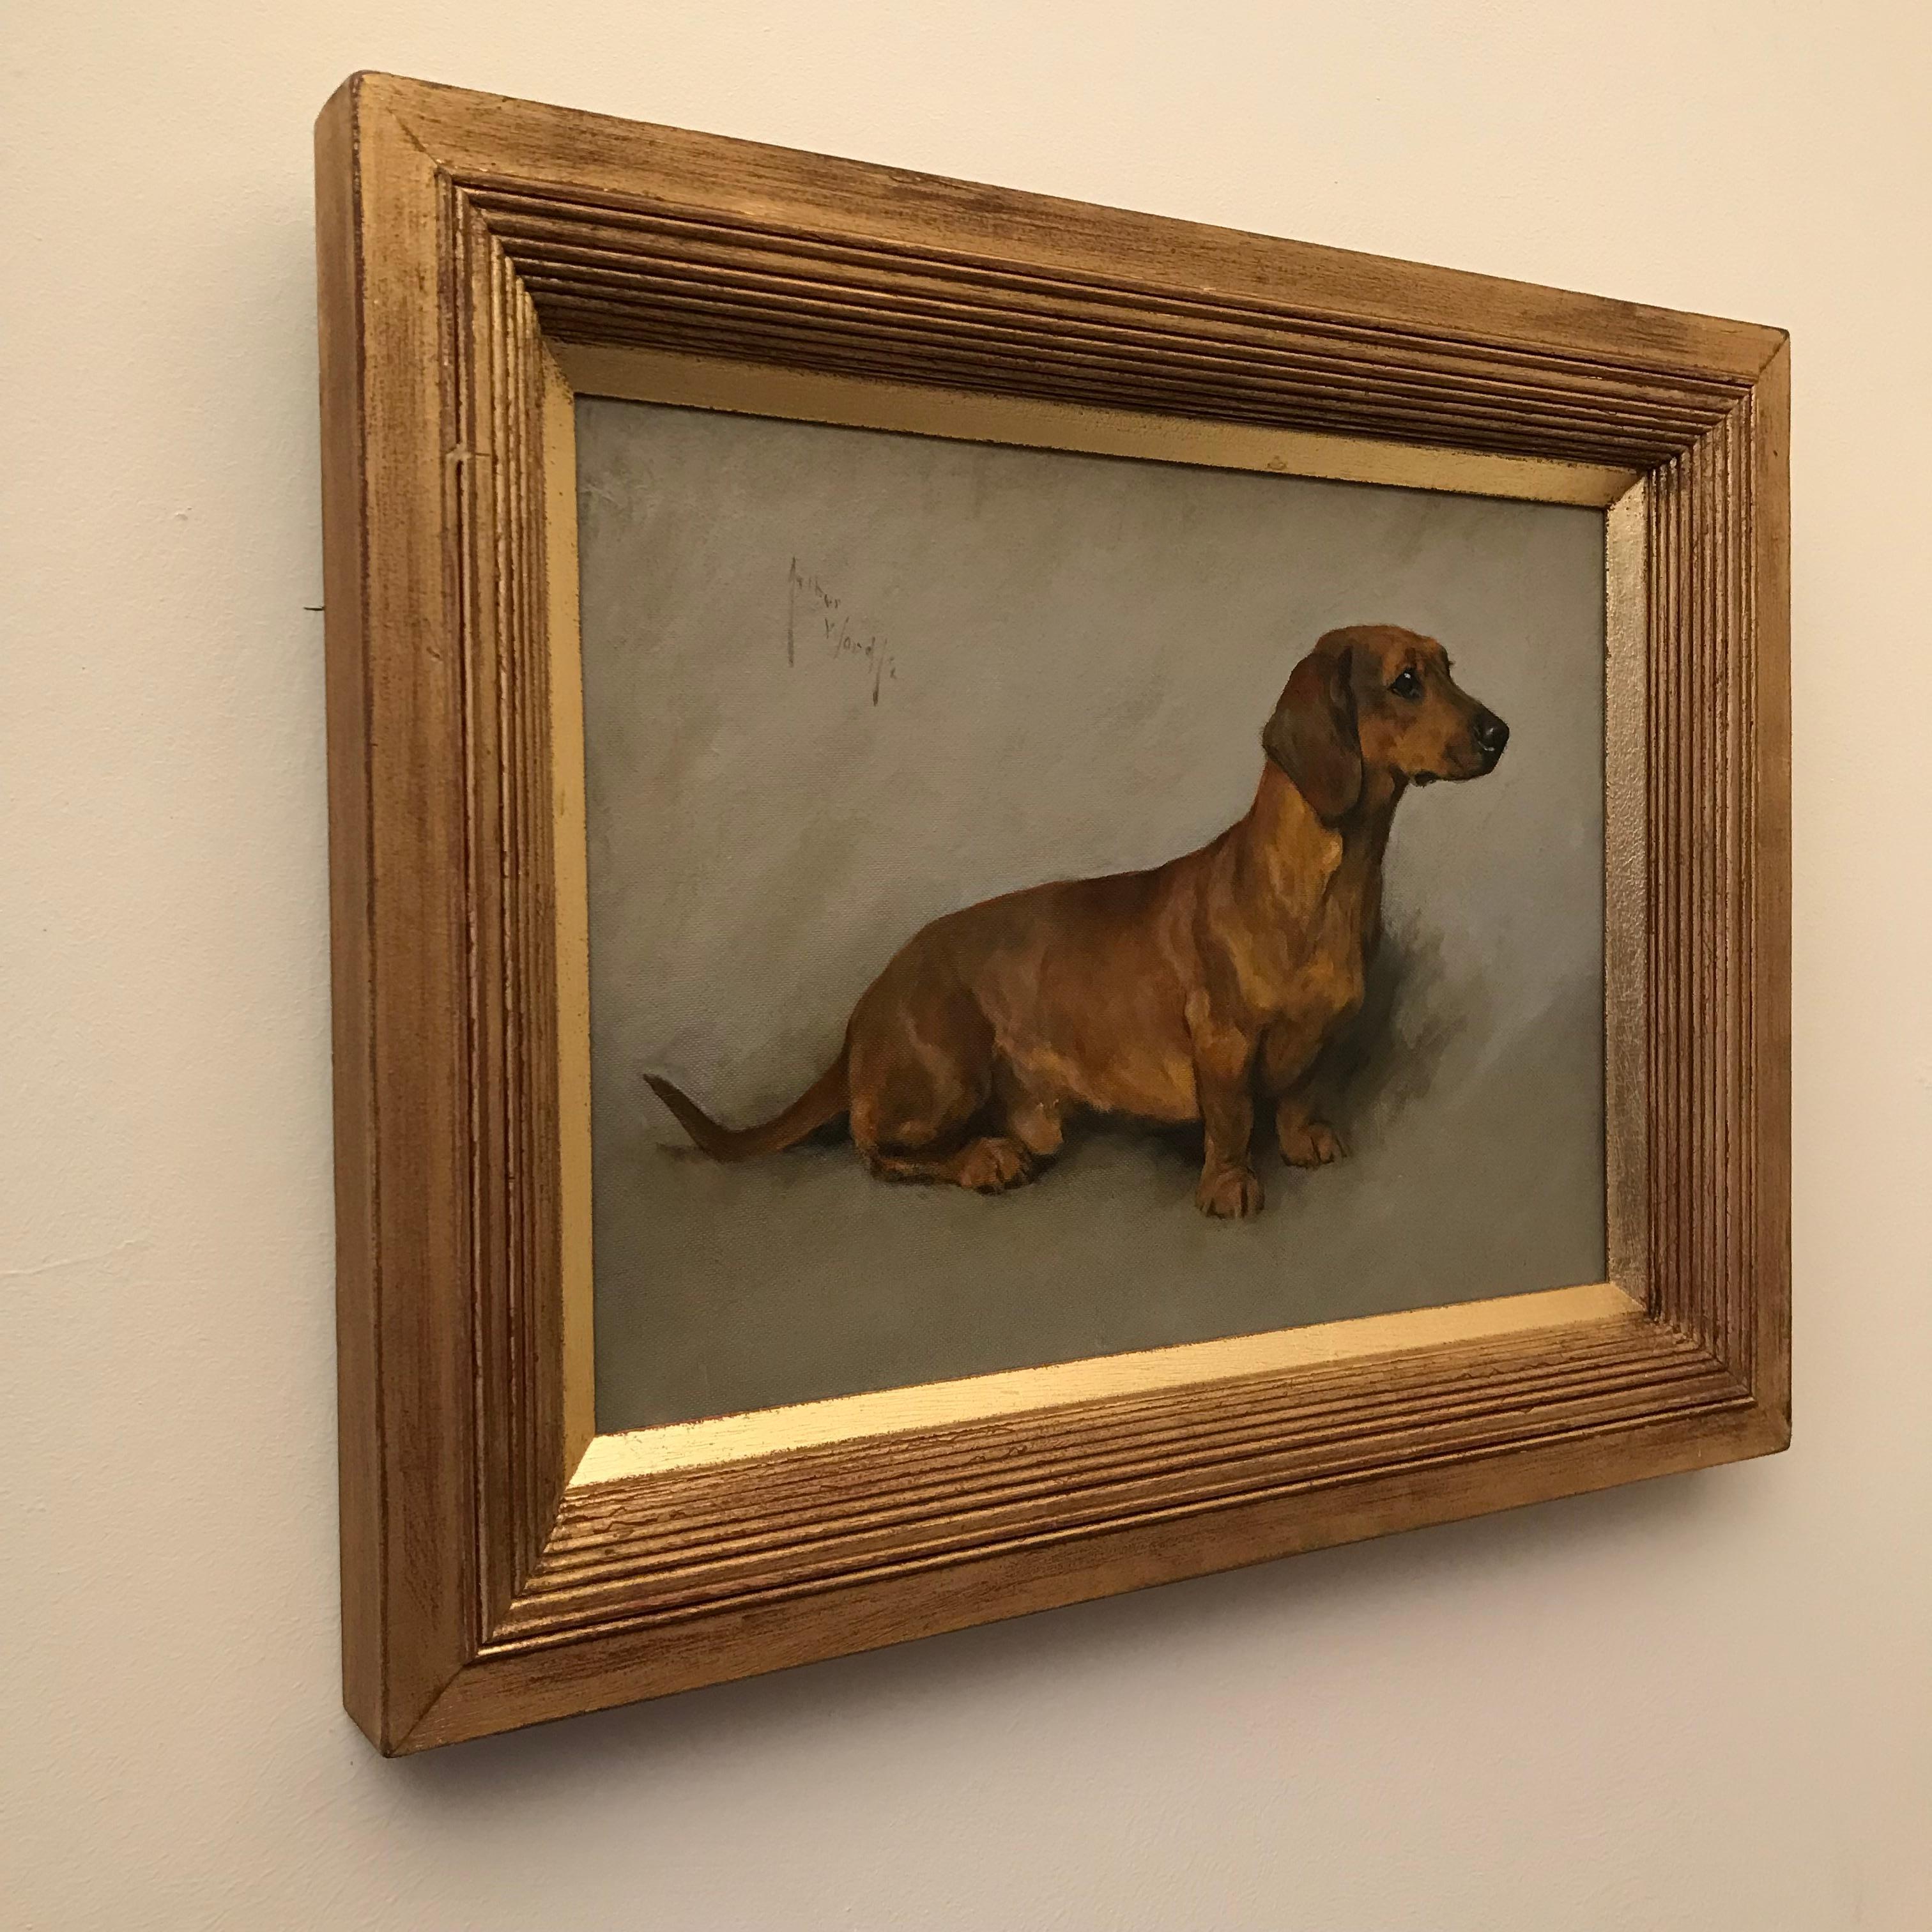 A well behaved Dachshund - dog, oil painting - Painting by Arthur Wardle